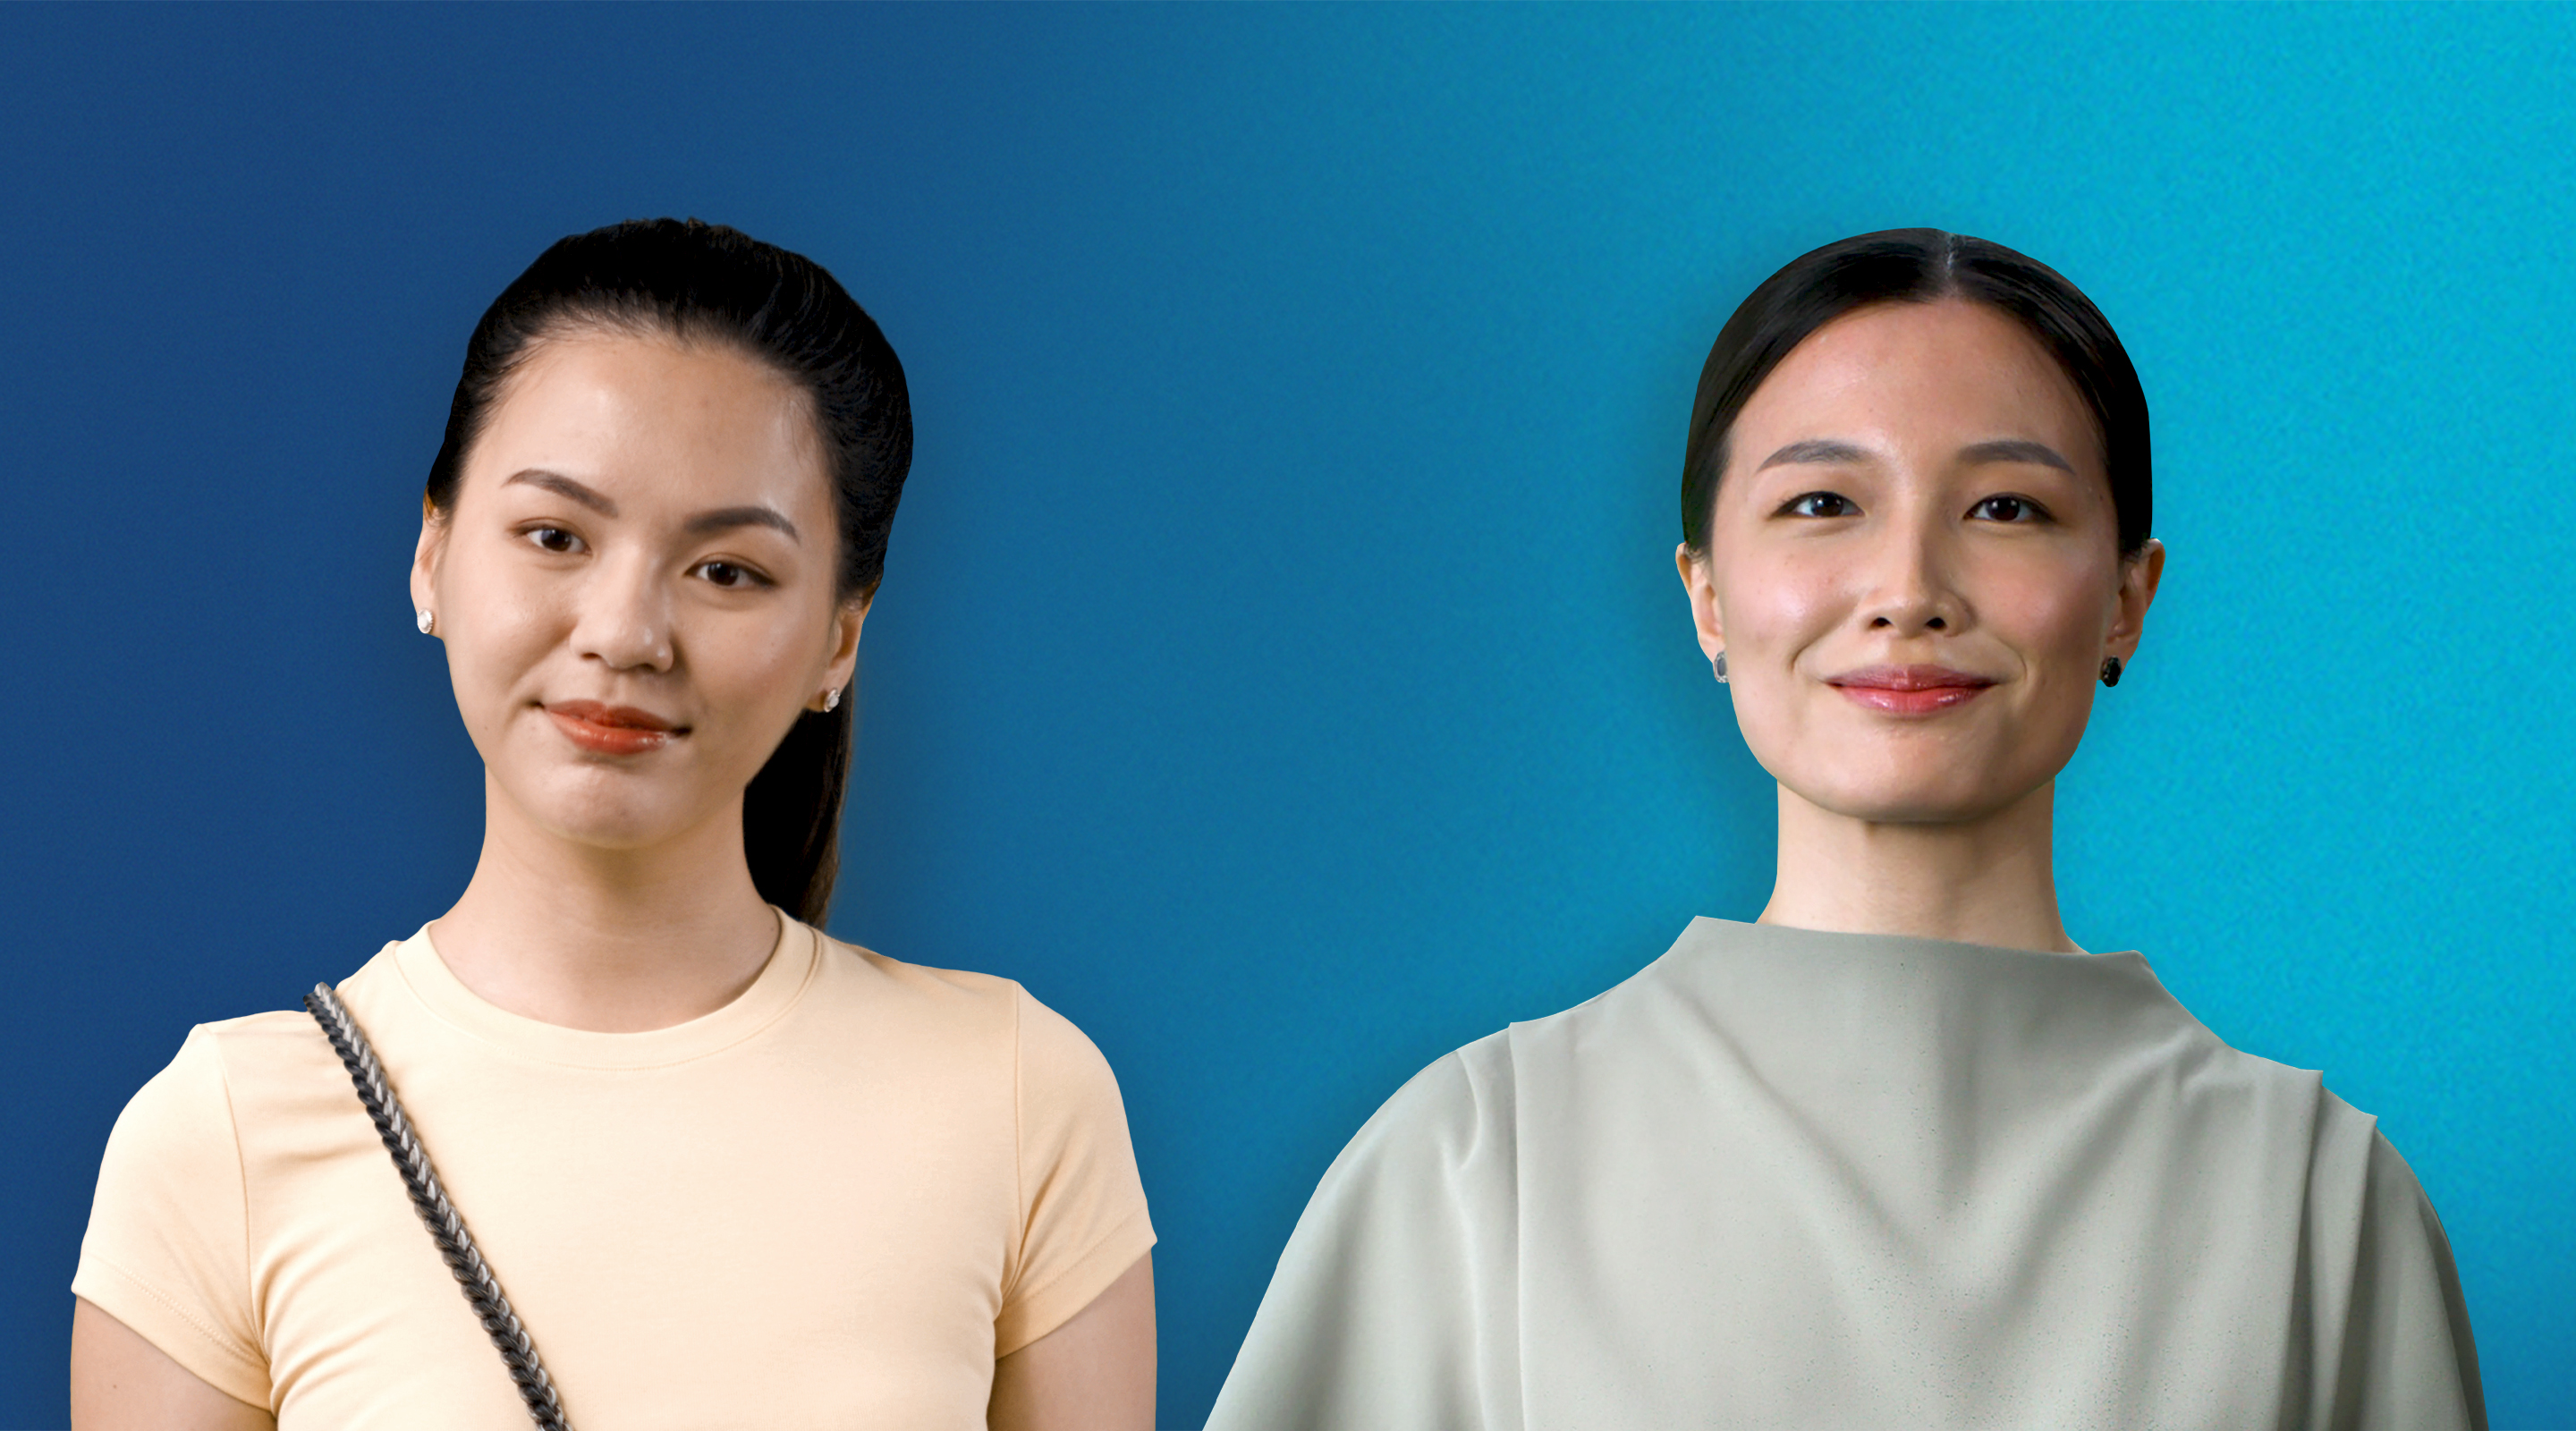 Actor Portrayals; Two women slightly smiling while looking concerned, on a blue gradient background.